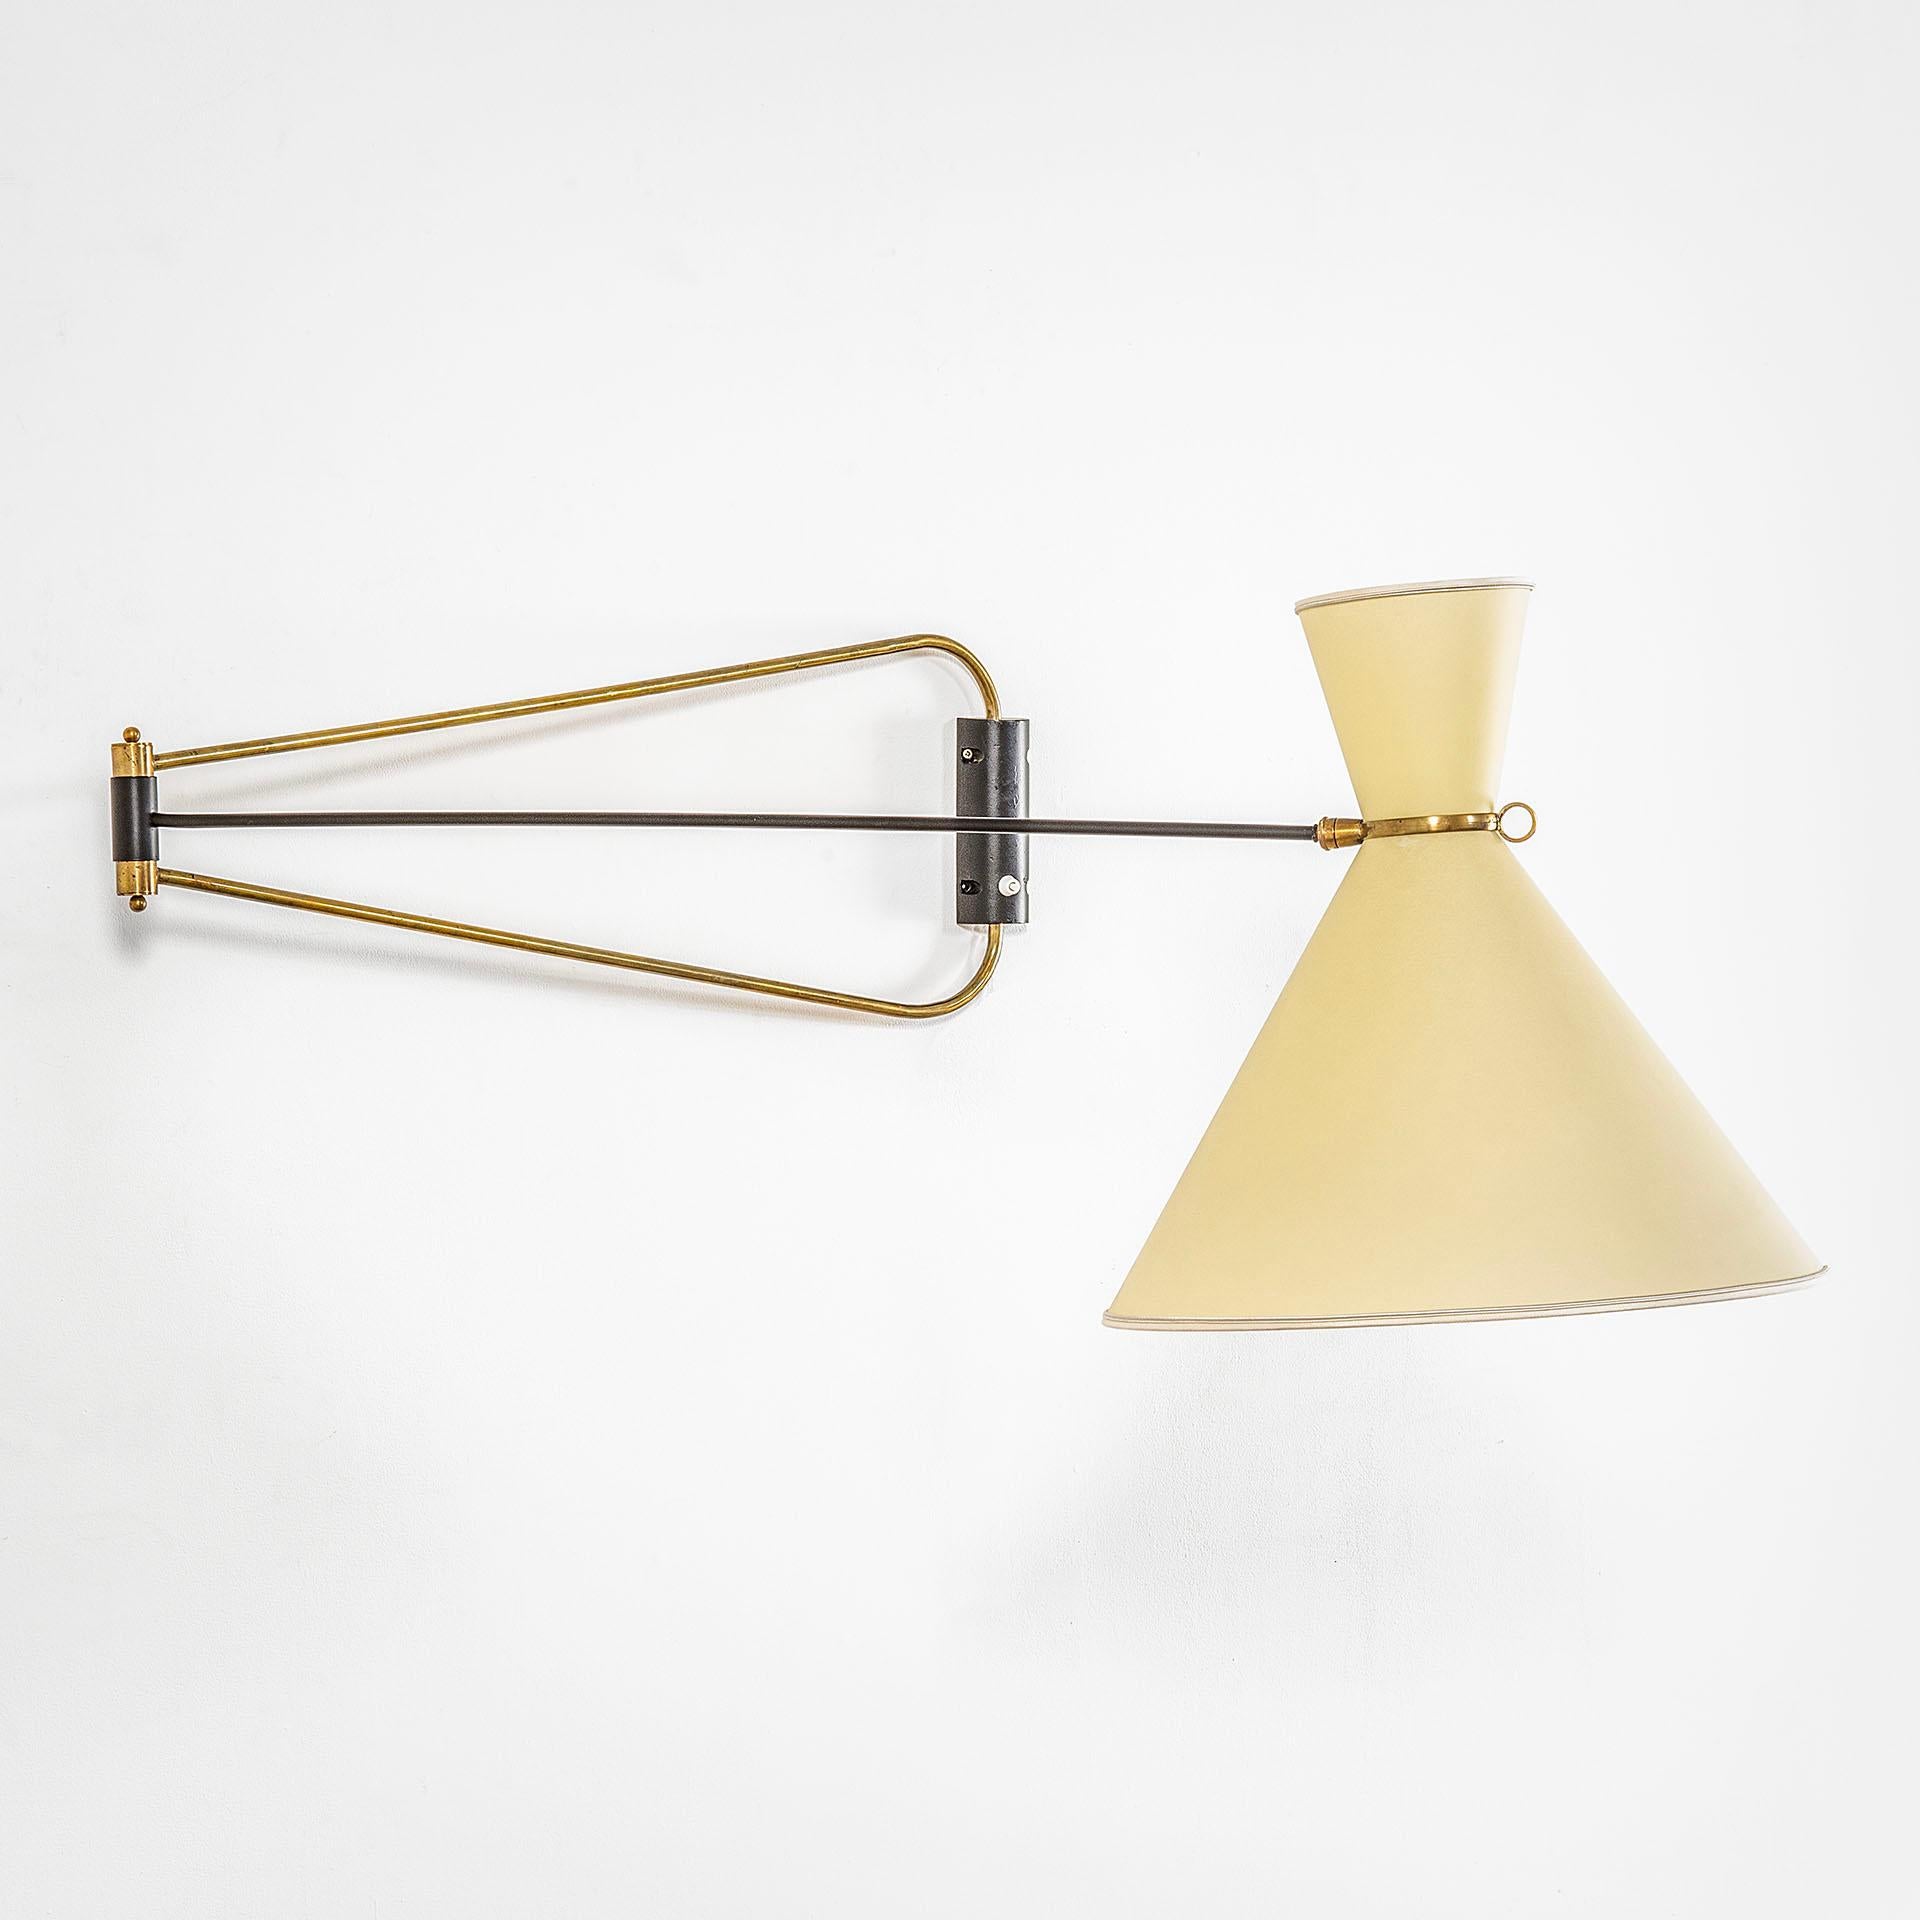 20th Century Robert Mathieu Directionable Wall Lamp in Brass and Fabric, 60s For Sale 2